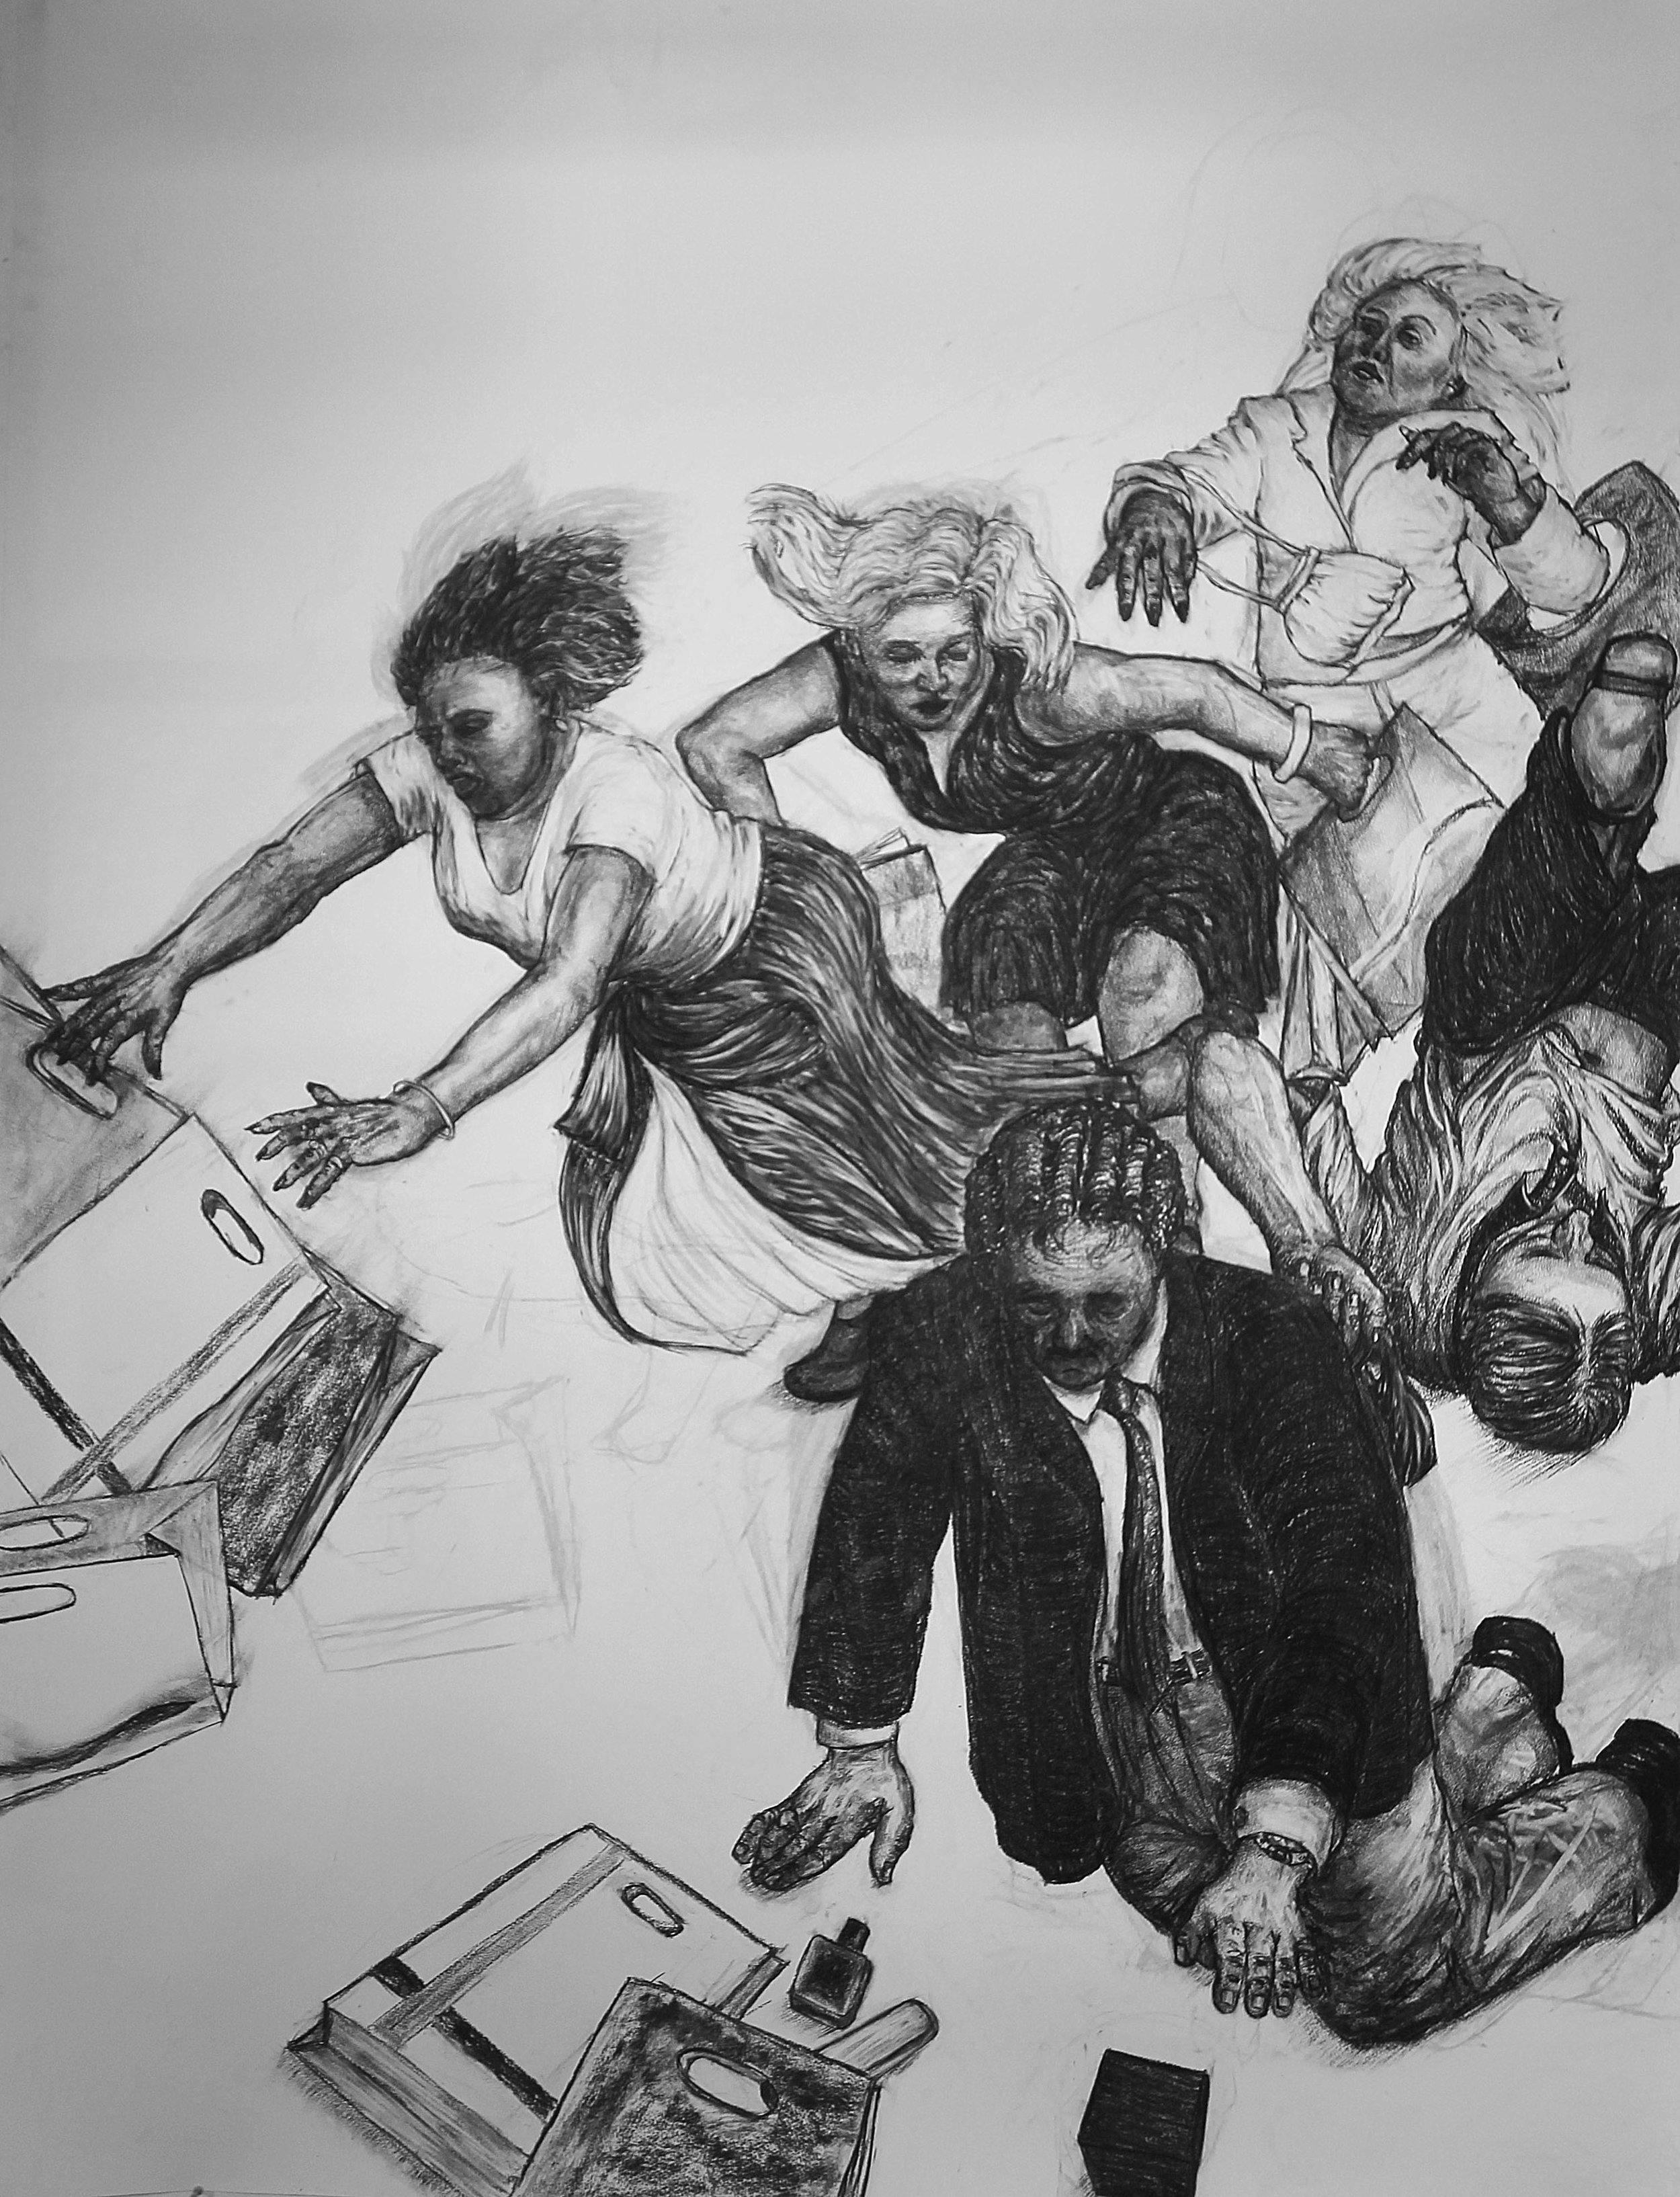 the sales 200x152cm,charcoal on paper.jpg